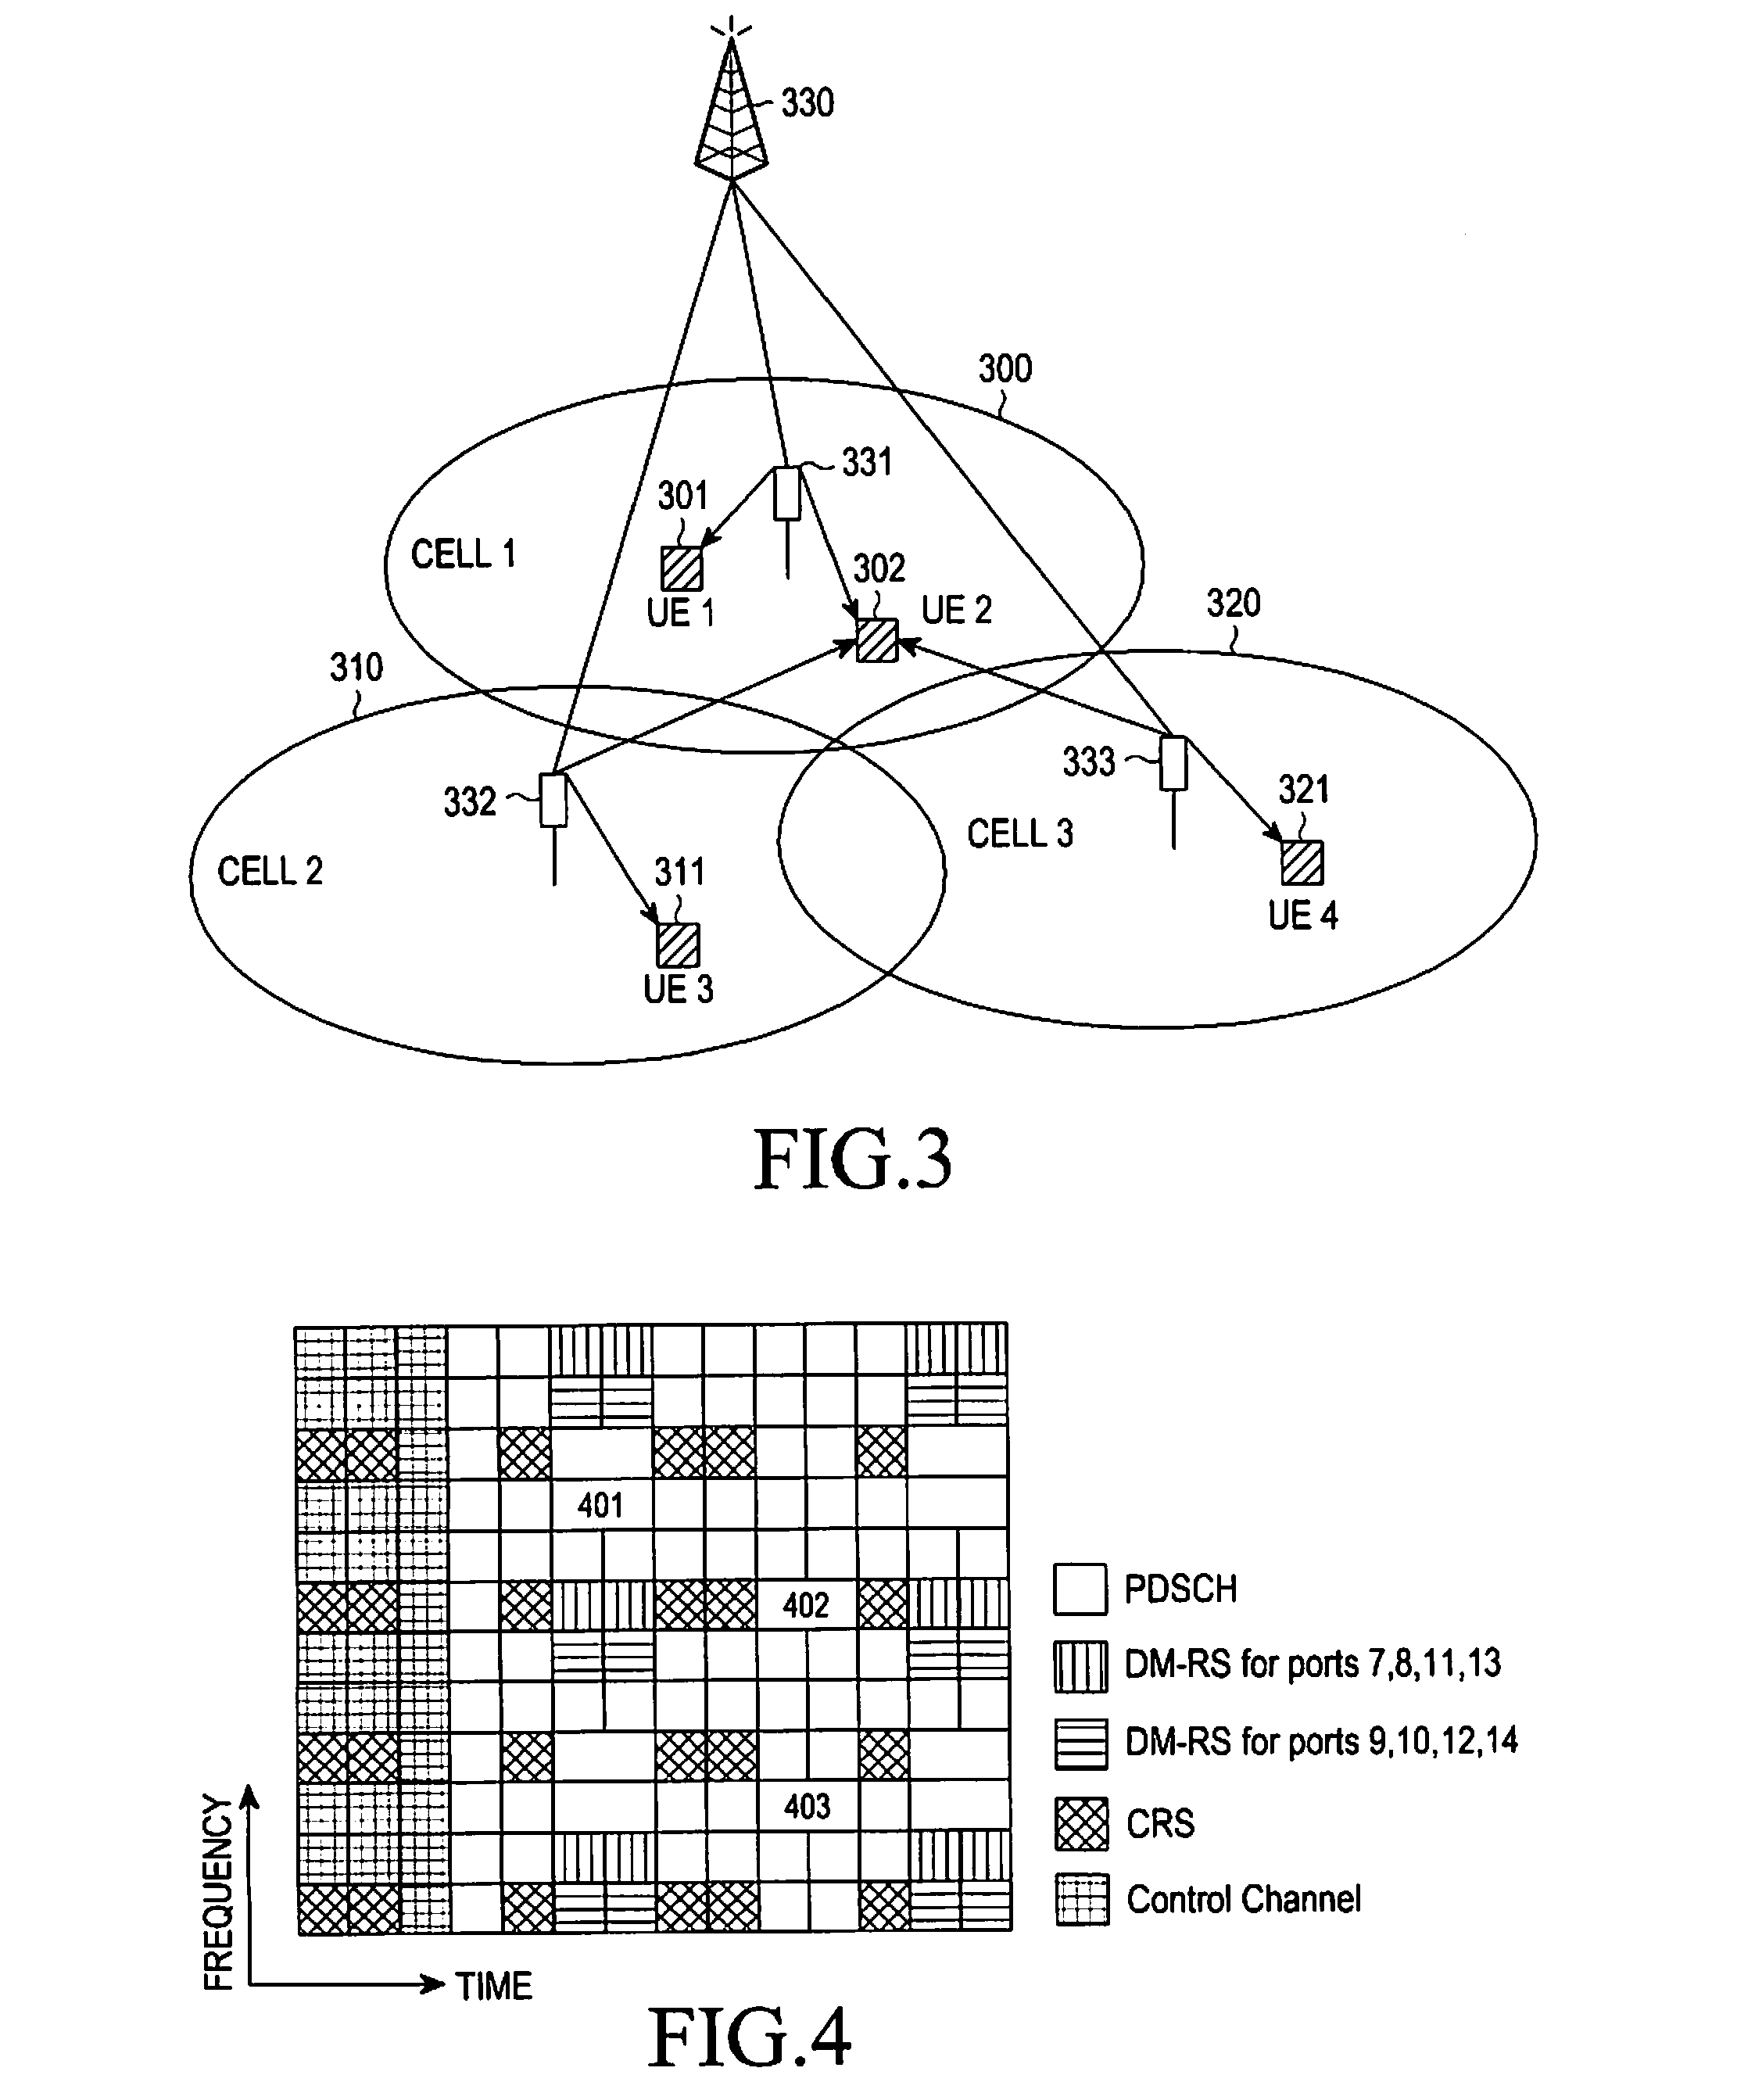 Method and apparatus for generating feedback in a communication system